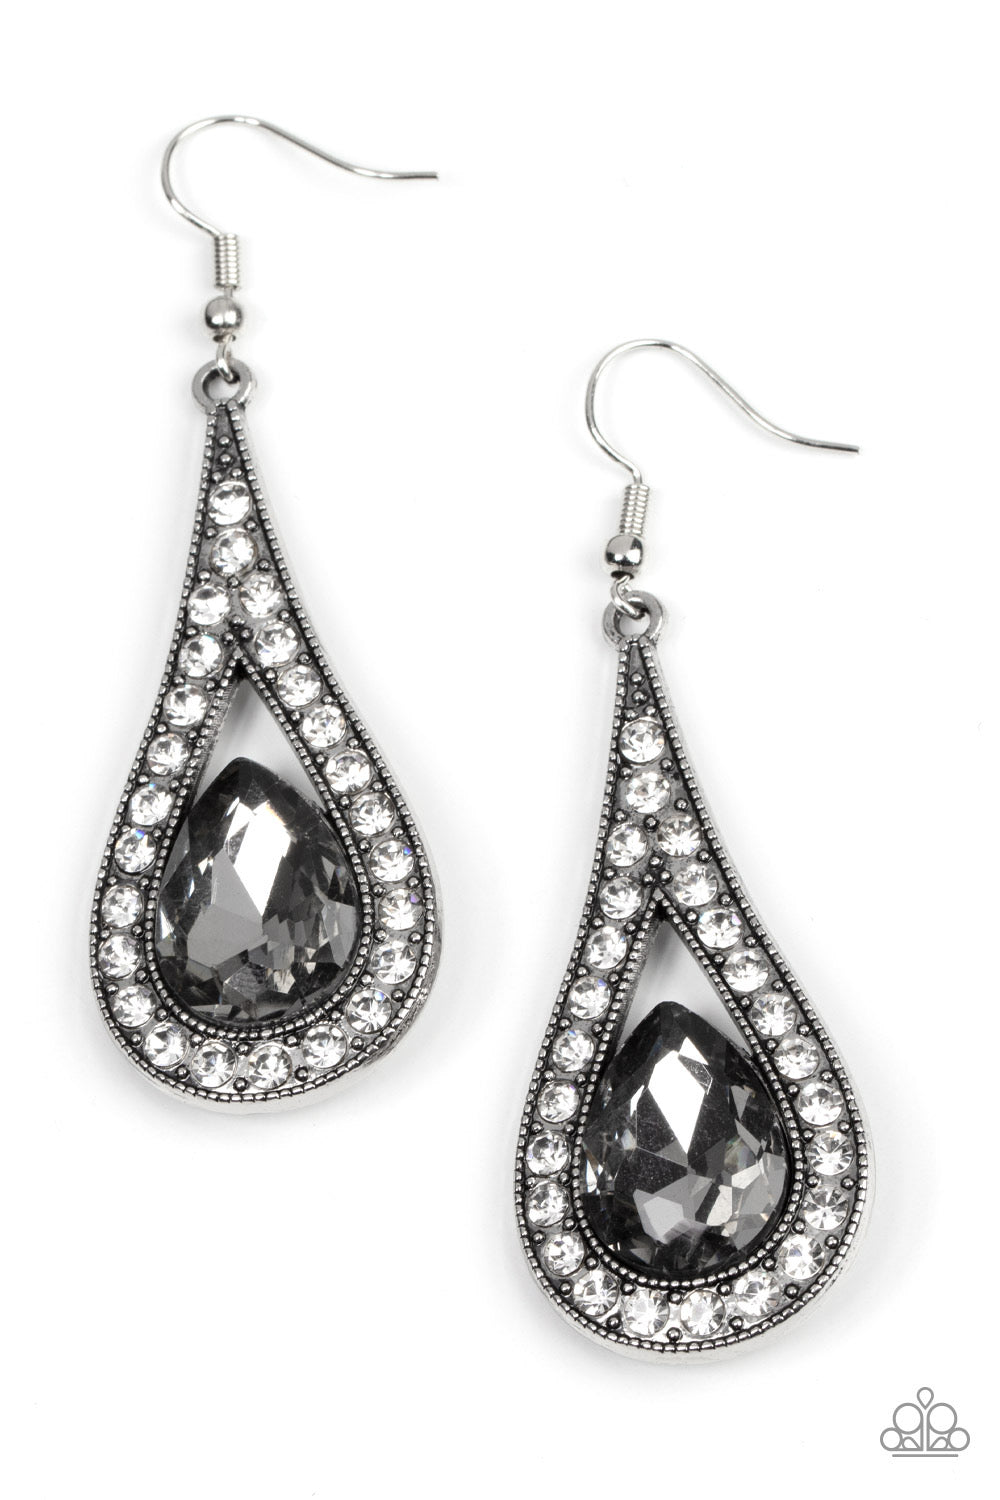 Dangle Earrings - Paparazzi A-Lister Attitude - Silver Earrings - Paparazzi Jewelry Images 